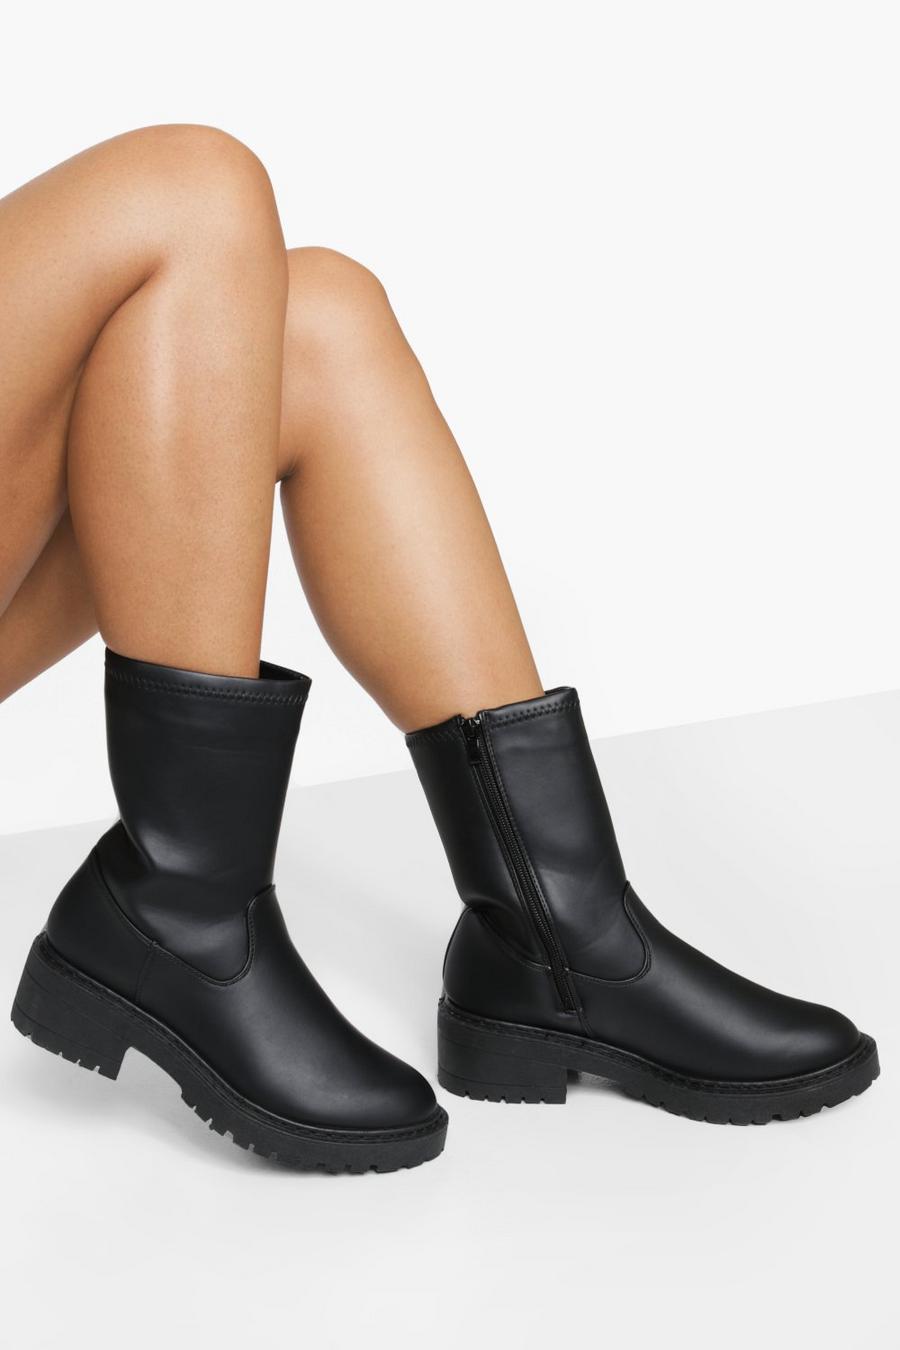 Black Wide Fit Chunky Calf High Boots image number 1